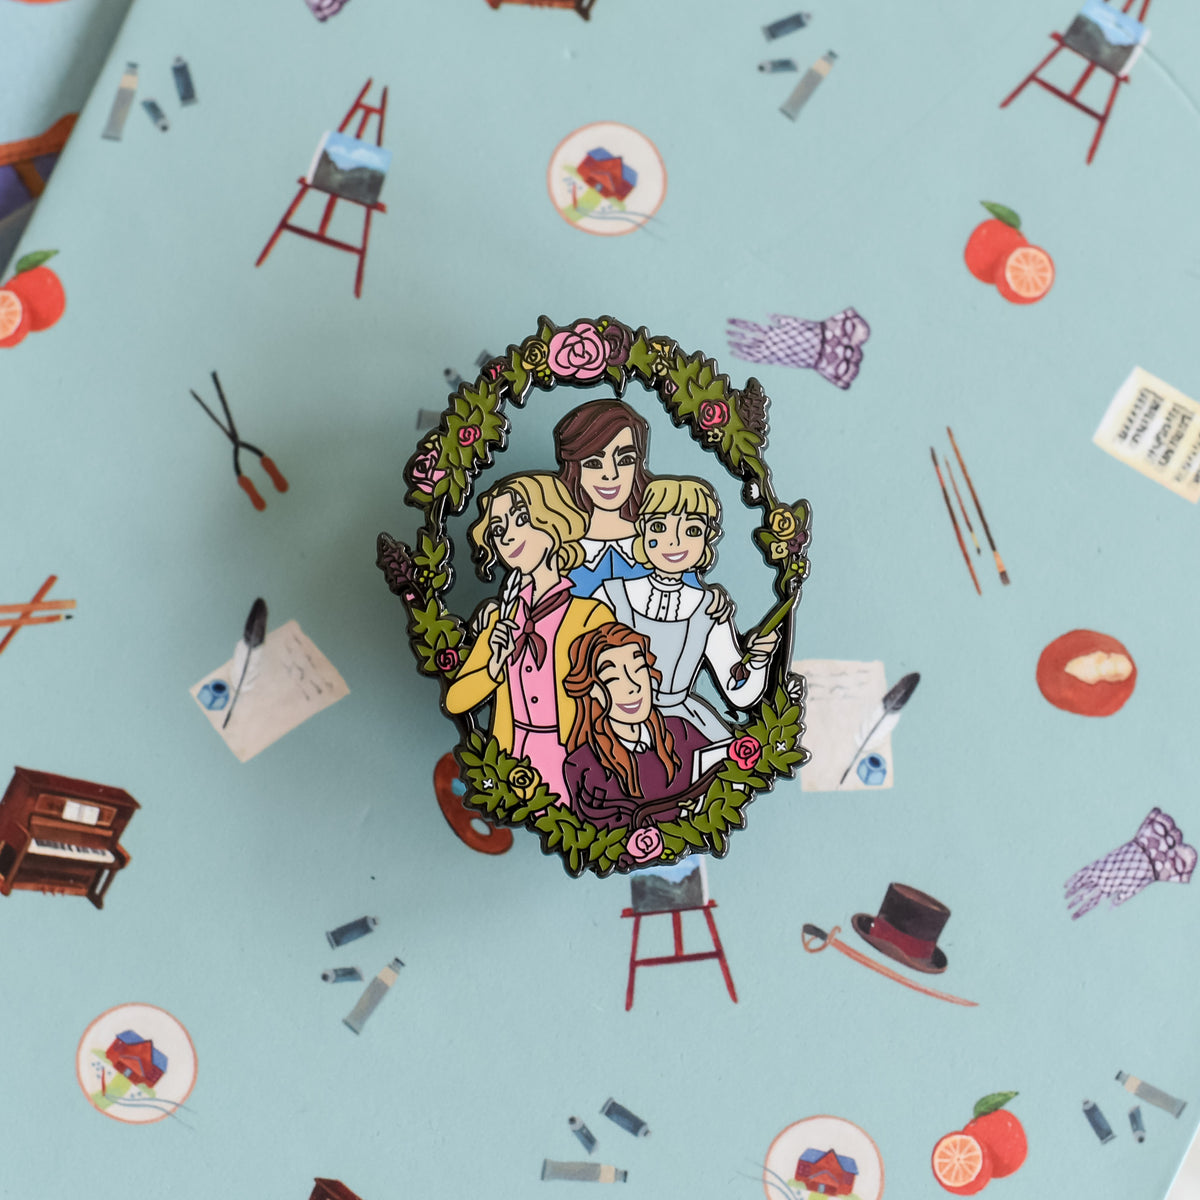 Little Women Enamel Pin includes all the March sisters with a wreath of flowers around them